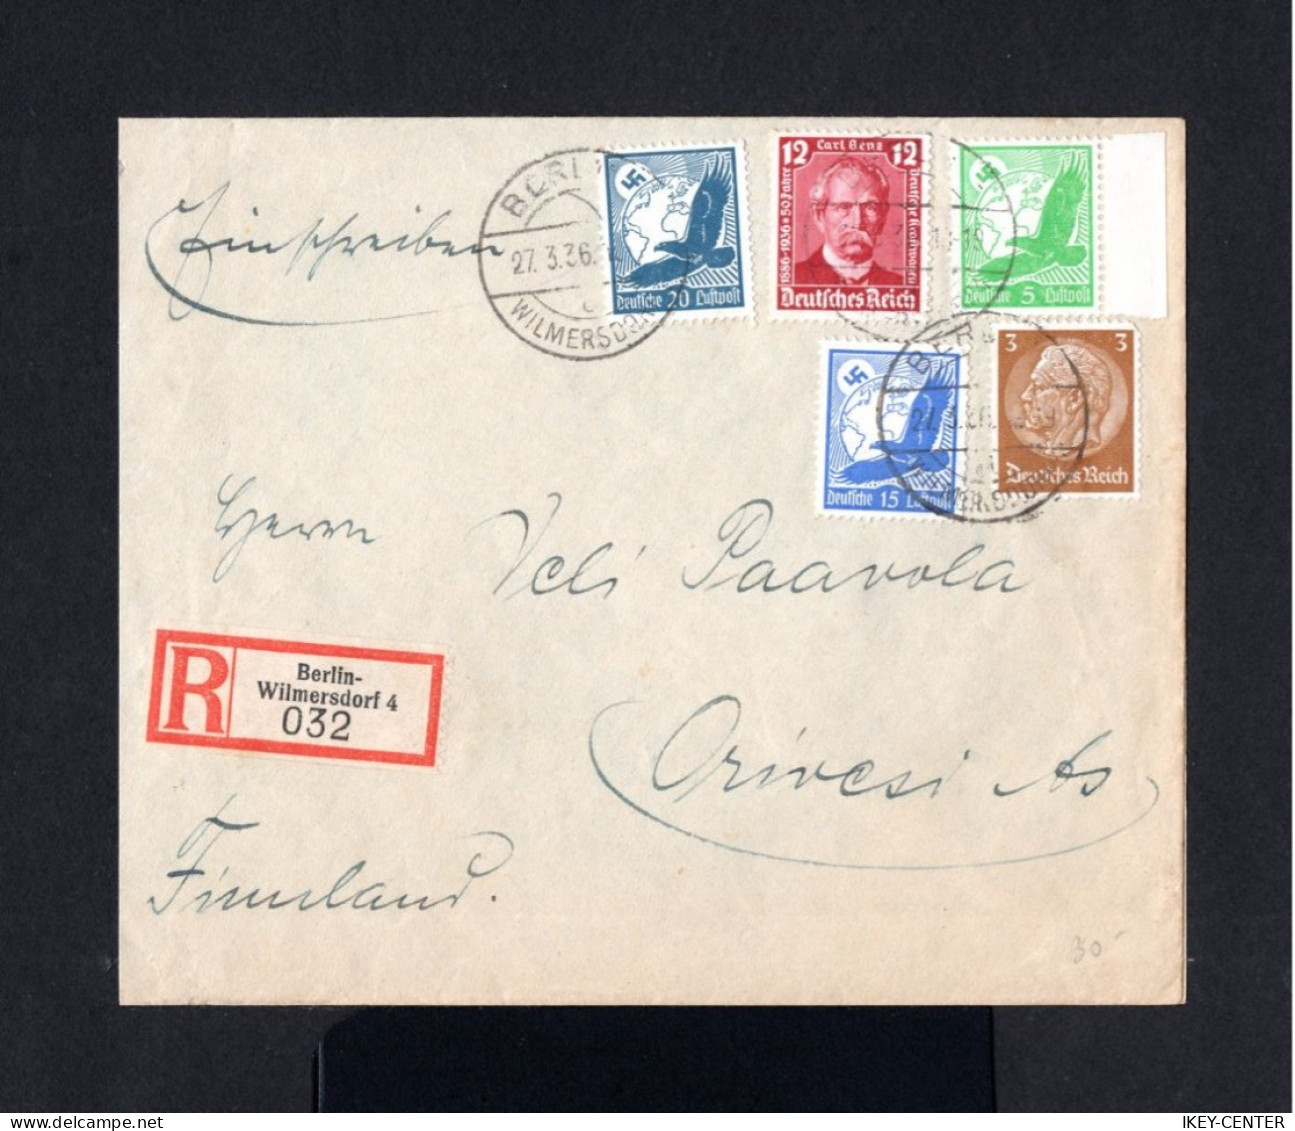 K756-GERMAN EMPIRE-Third Reich.MILITARY NAZI REGISTERED COVER BERLIN To FINLAND.1936.WWII.DEUTSCHES REICH - Covers & Documents